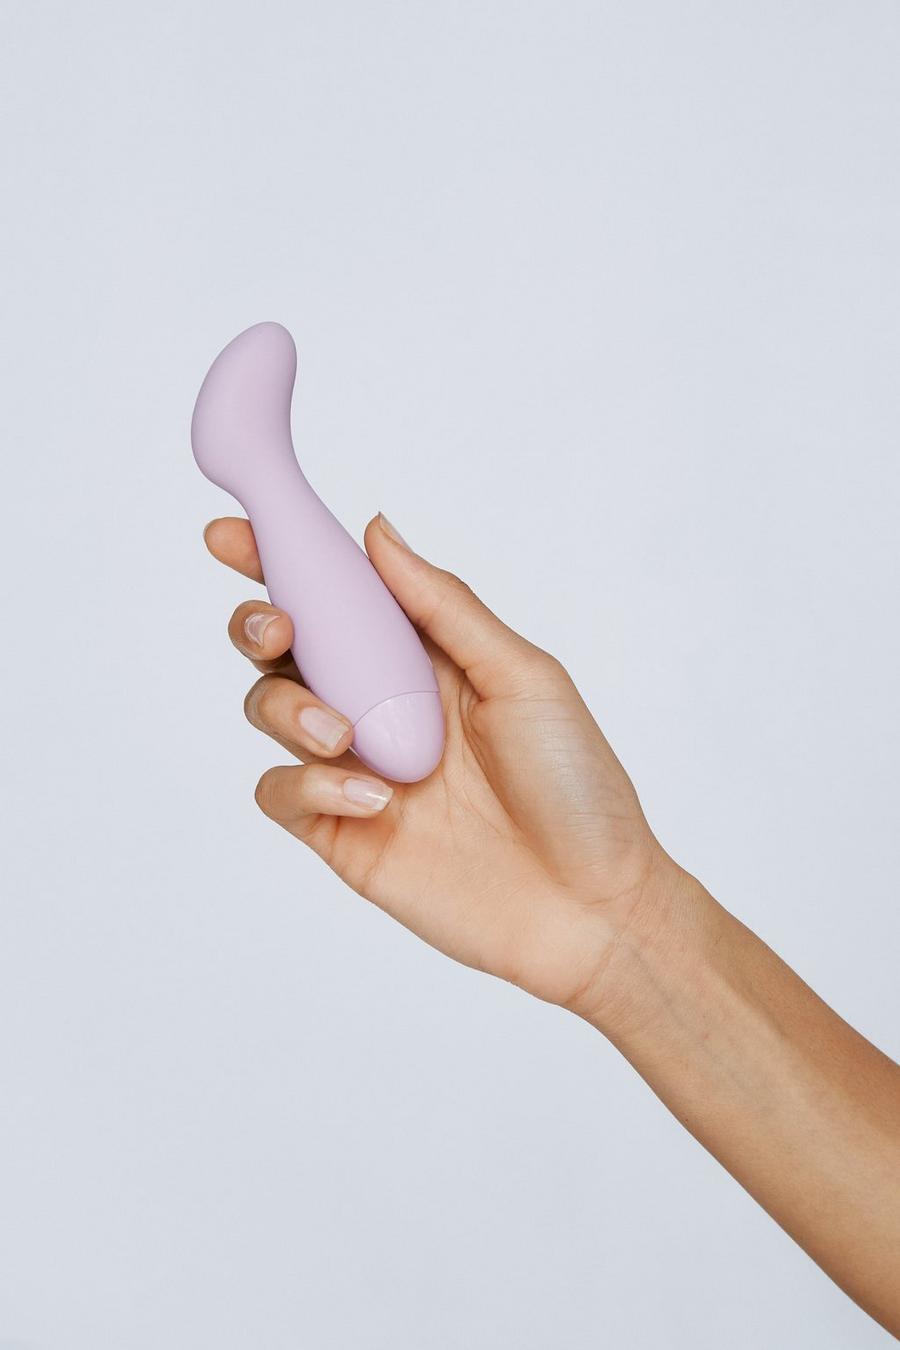 Lilac 11 Function Rechargeable G-spot Wand Vibrator